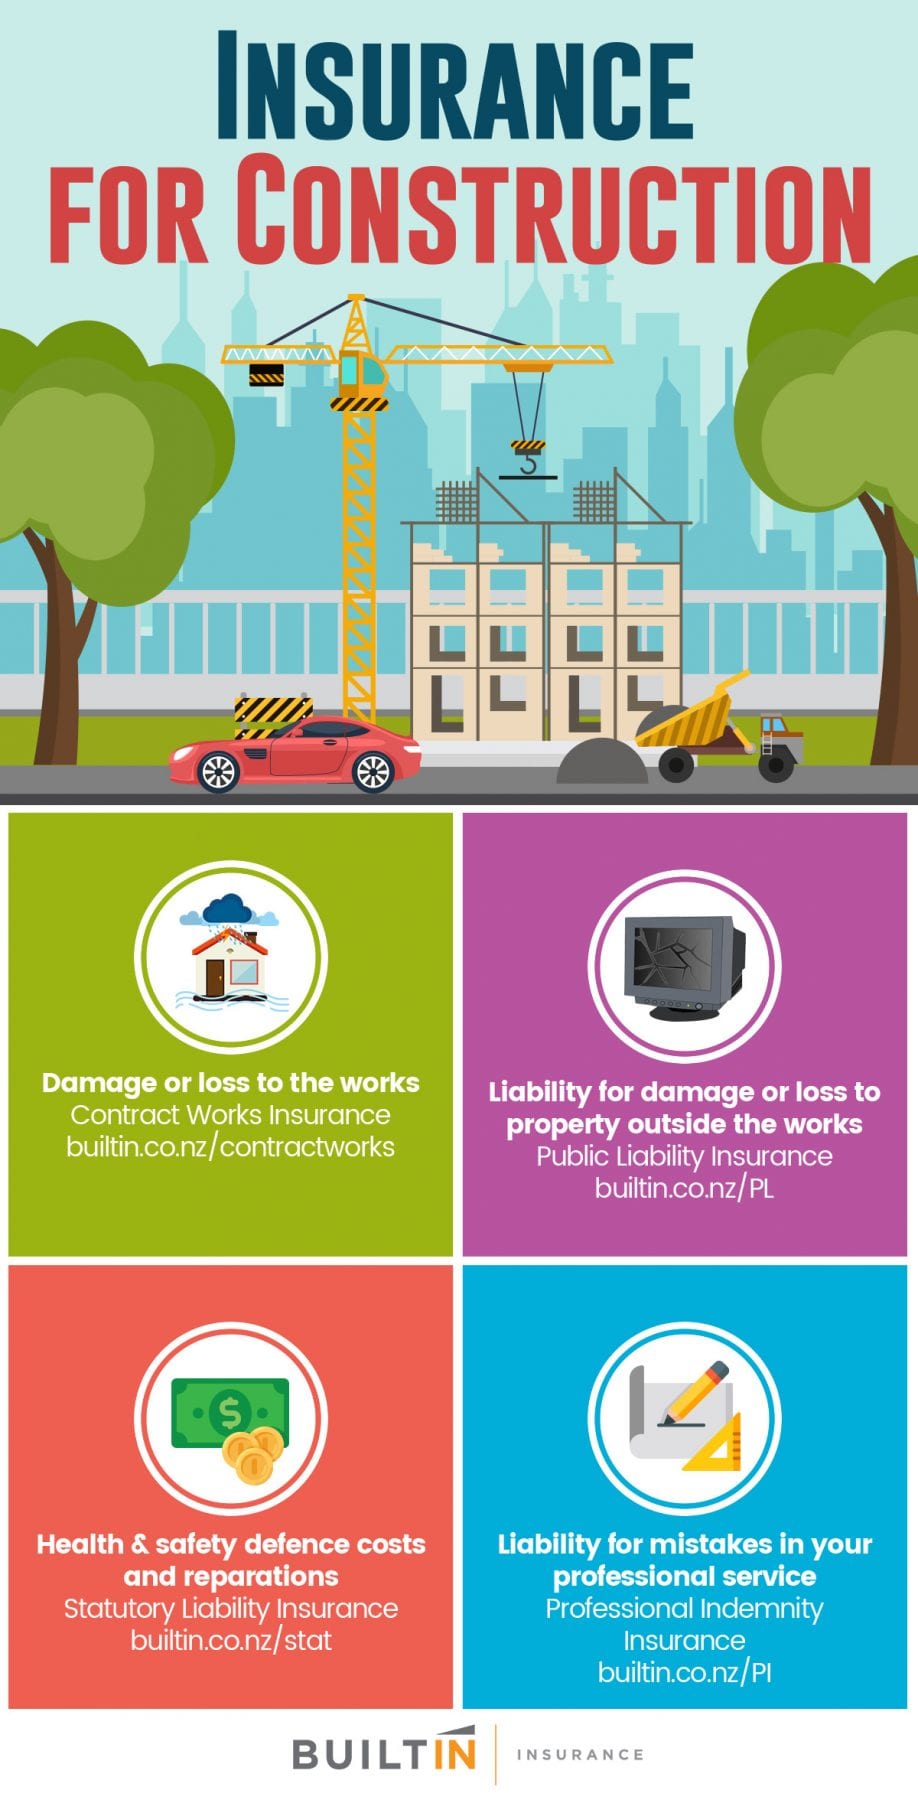 Insurance for Construction Infographic